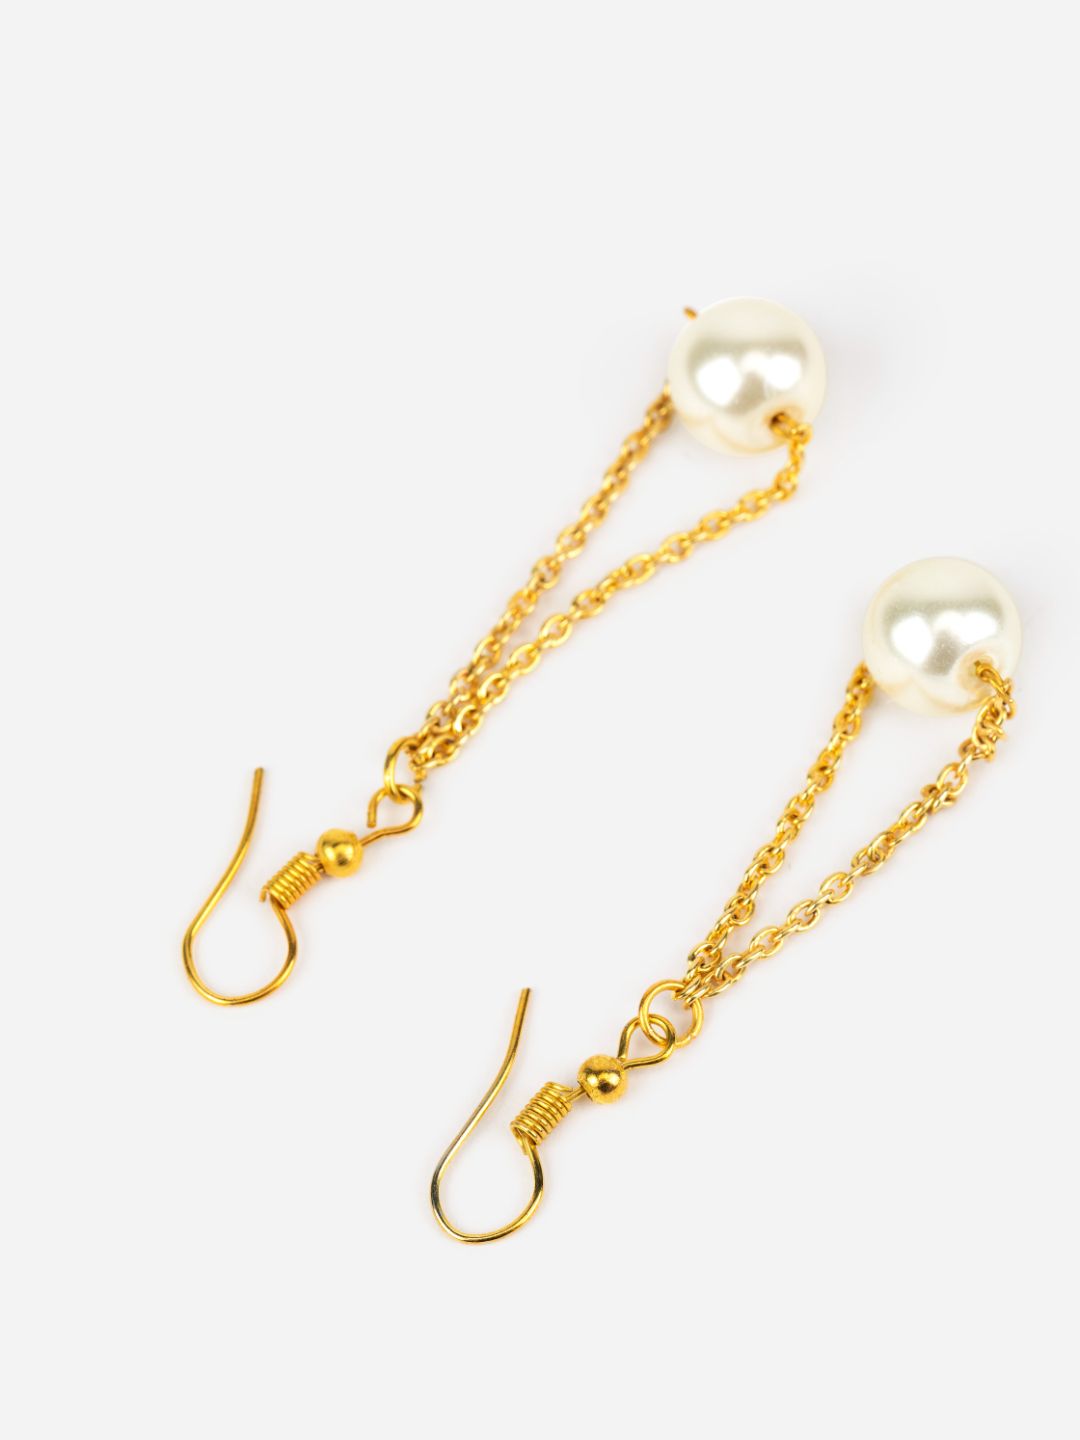 White Pearl Link Chain Gold-Plated Drop Earrings